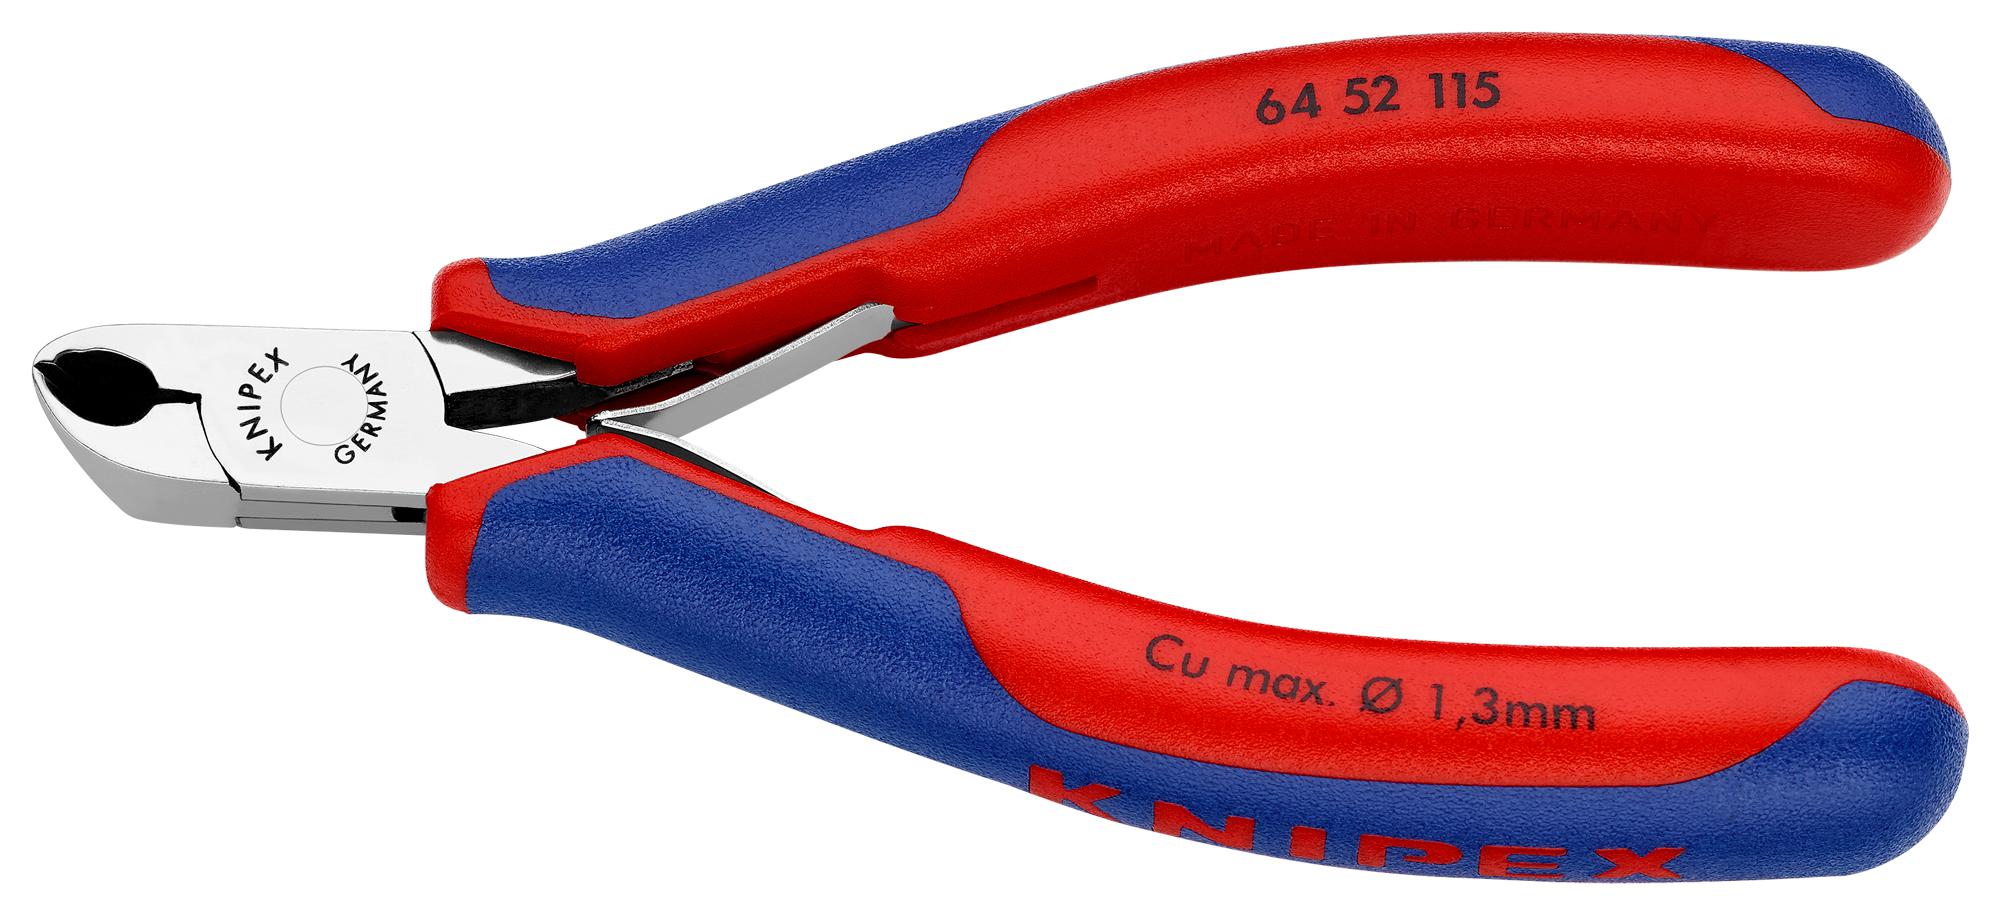 64 52 115 OBLIQUE CUTTING NIPPERS KNIPEX